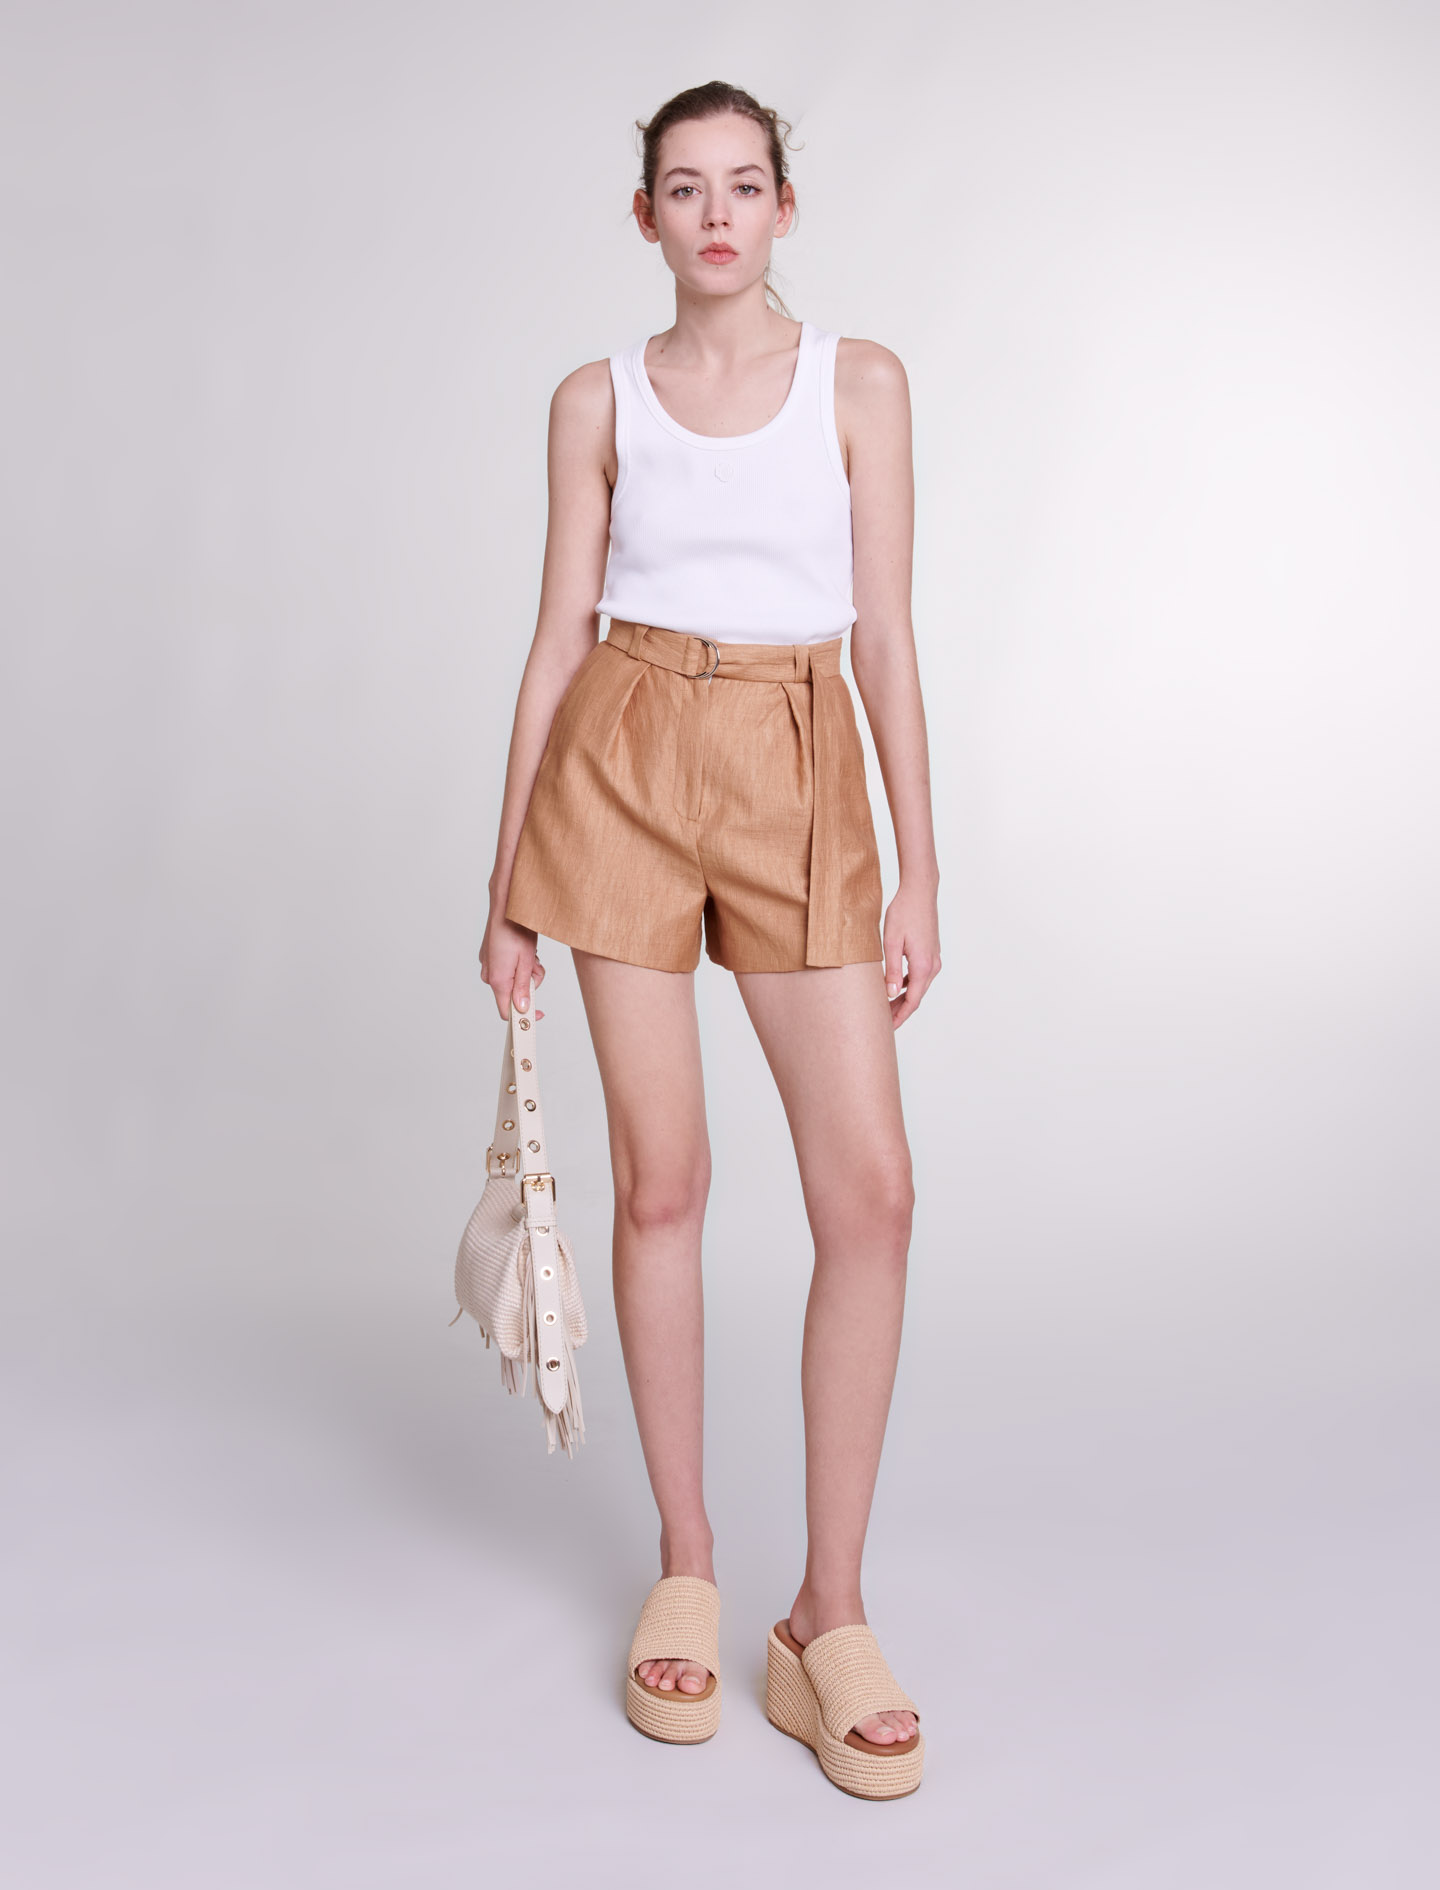 Maje Woman's linen, Linen shorts for Spring/Summer, in color Brown / Brown